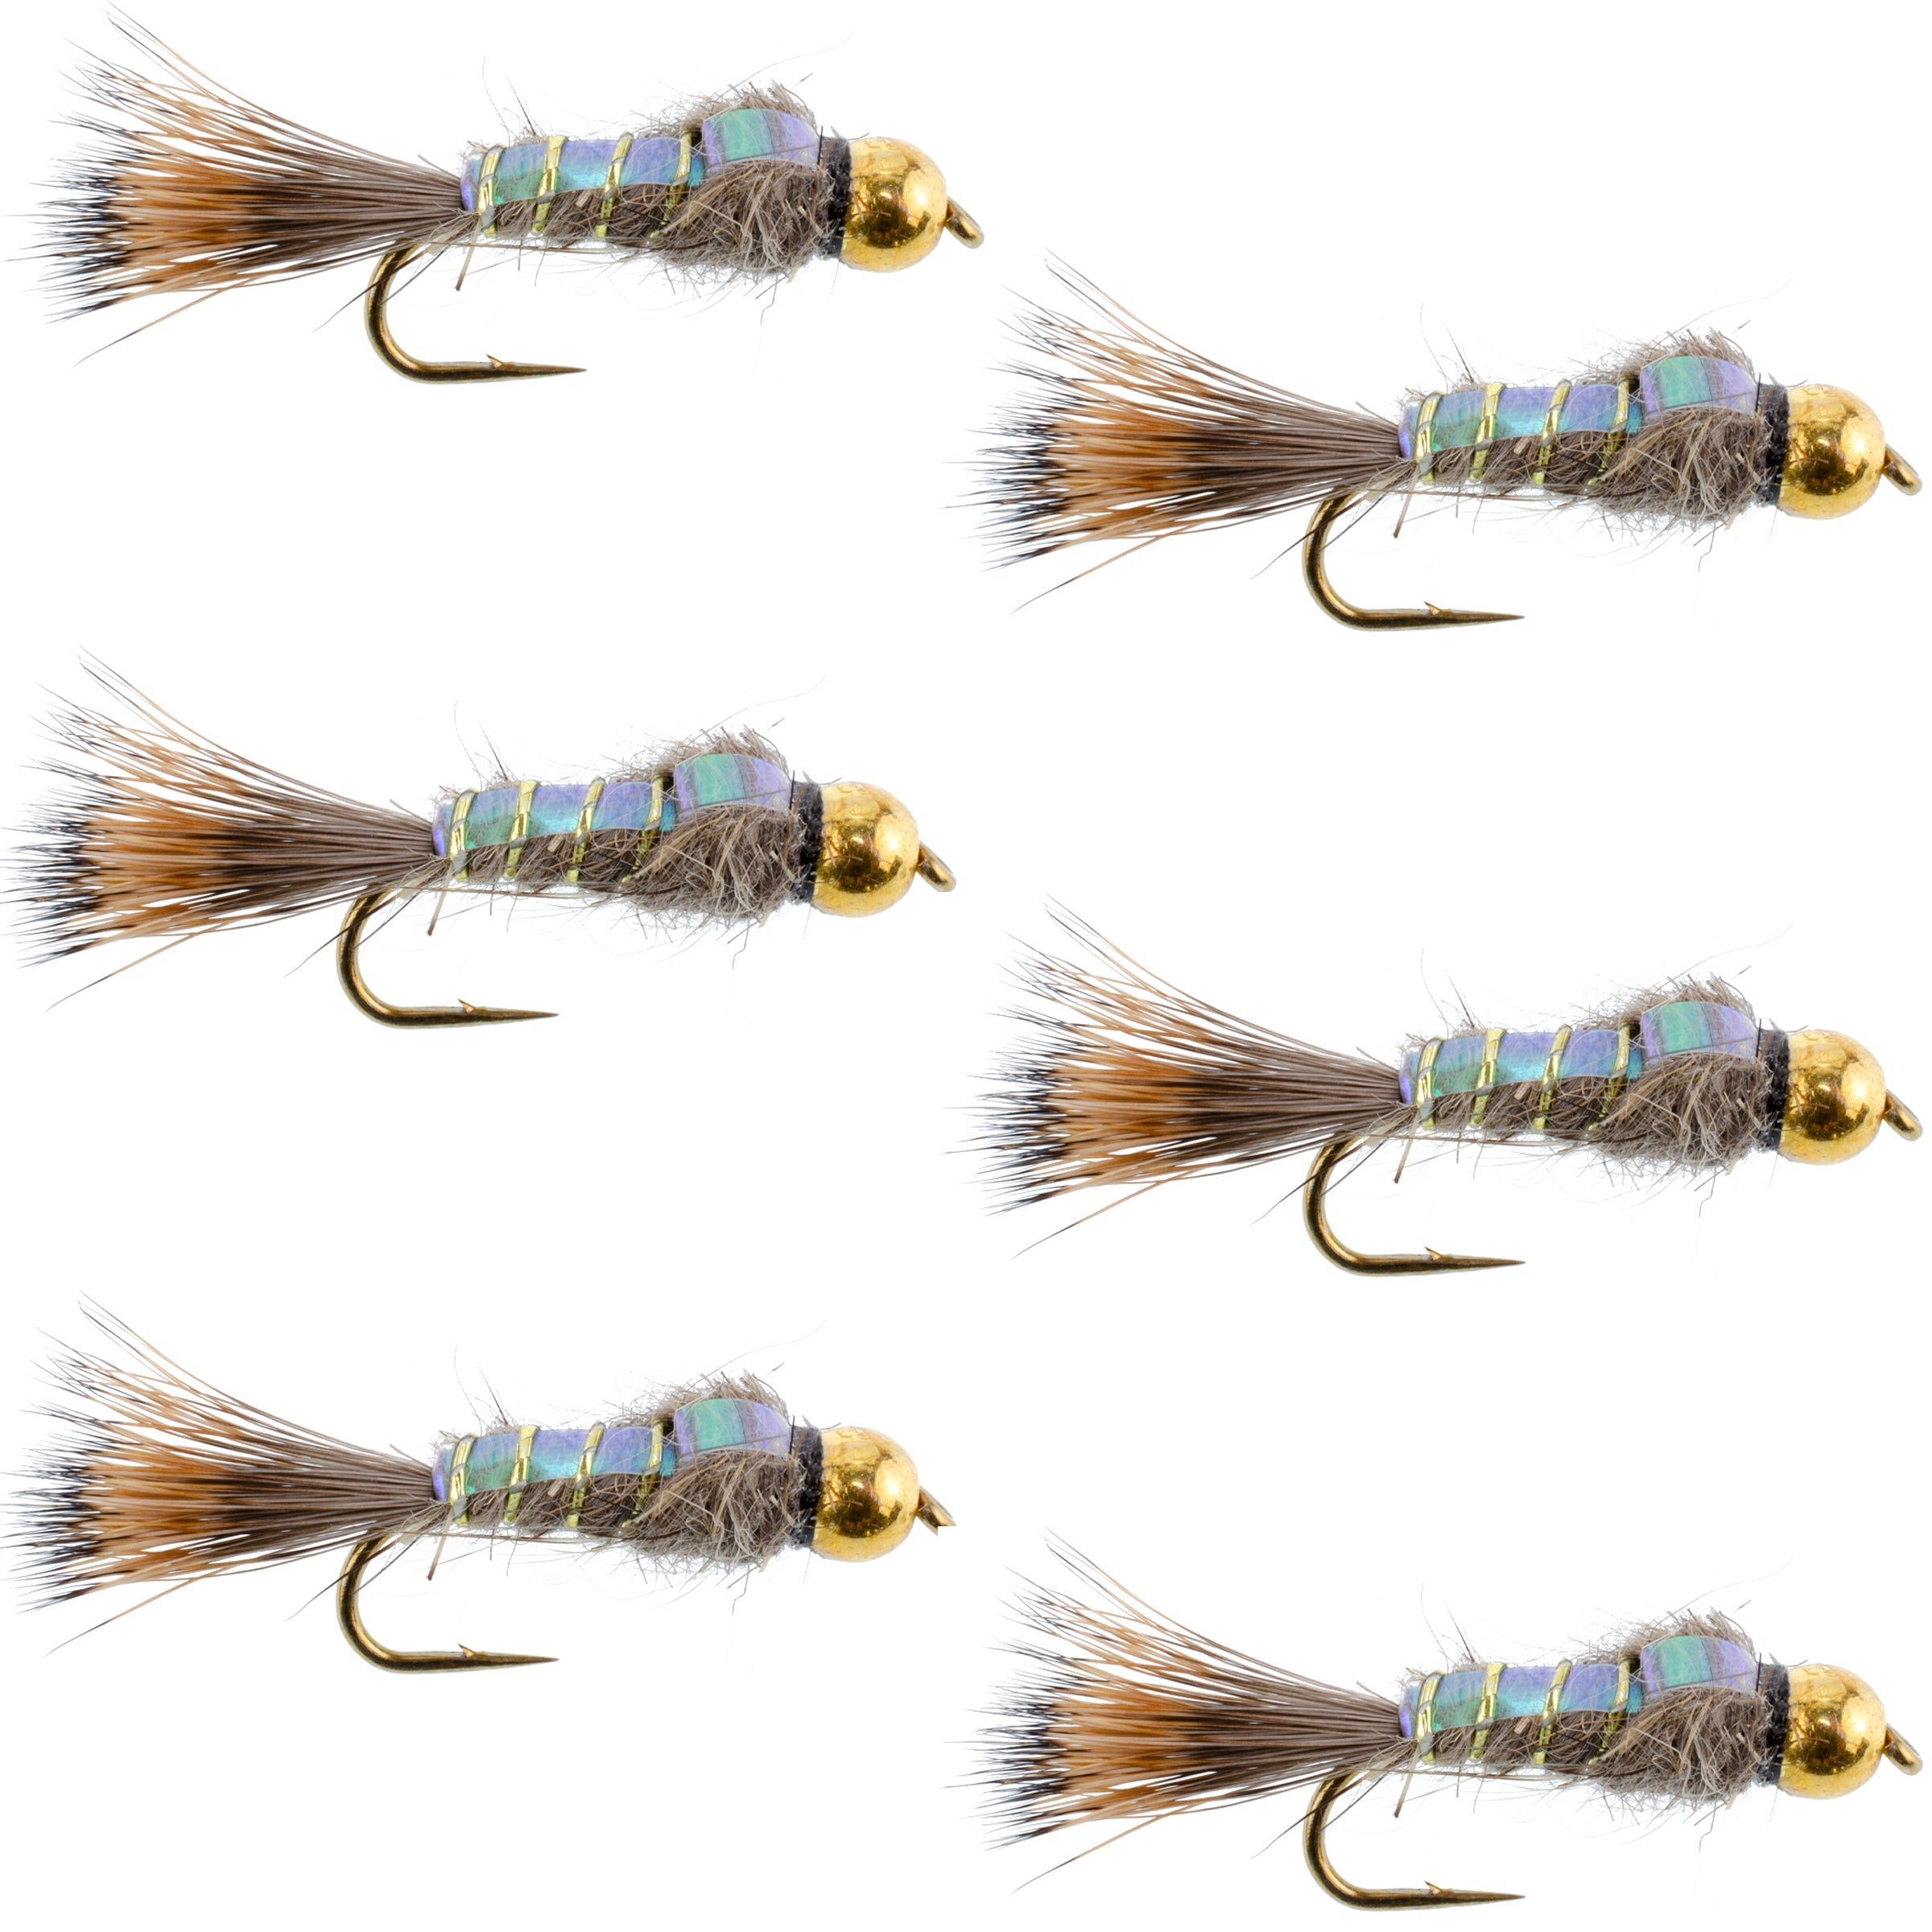 Bead Head Nymph Fly Fishing Flies - Flashback Gold Ribbed Hare's Ear Trout Fly - Nymph Wet Fly - 6 Flies Hook Size 10